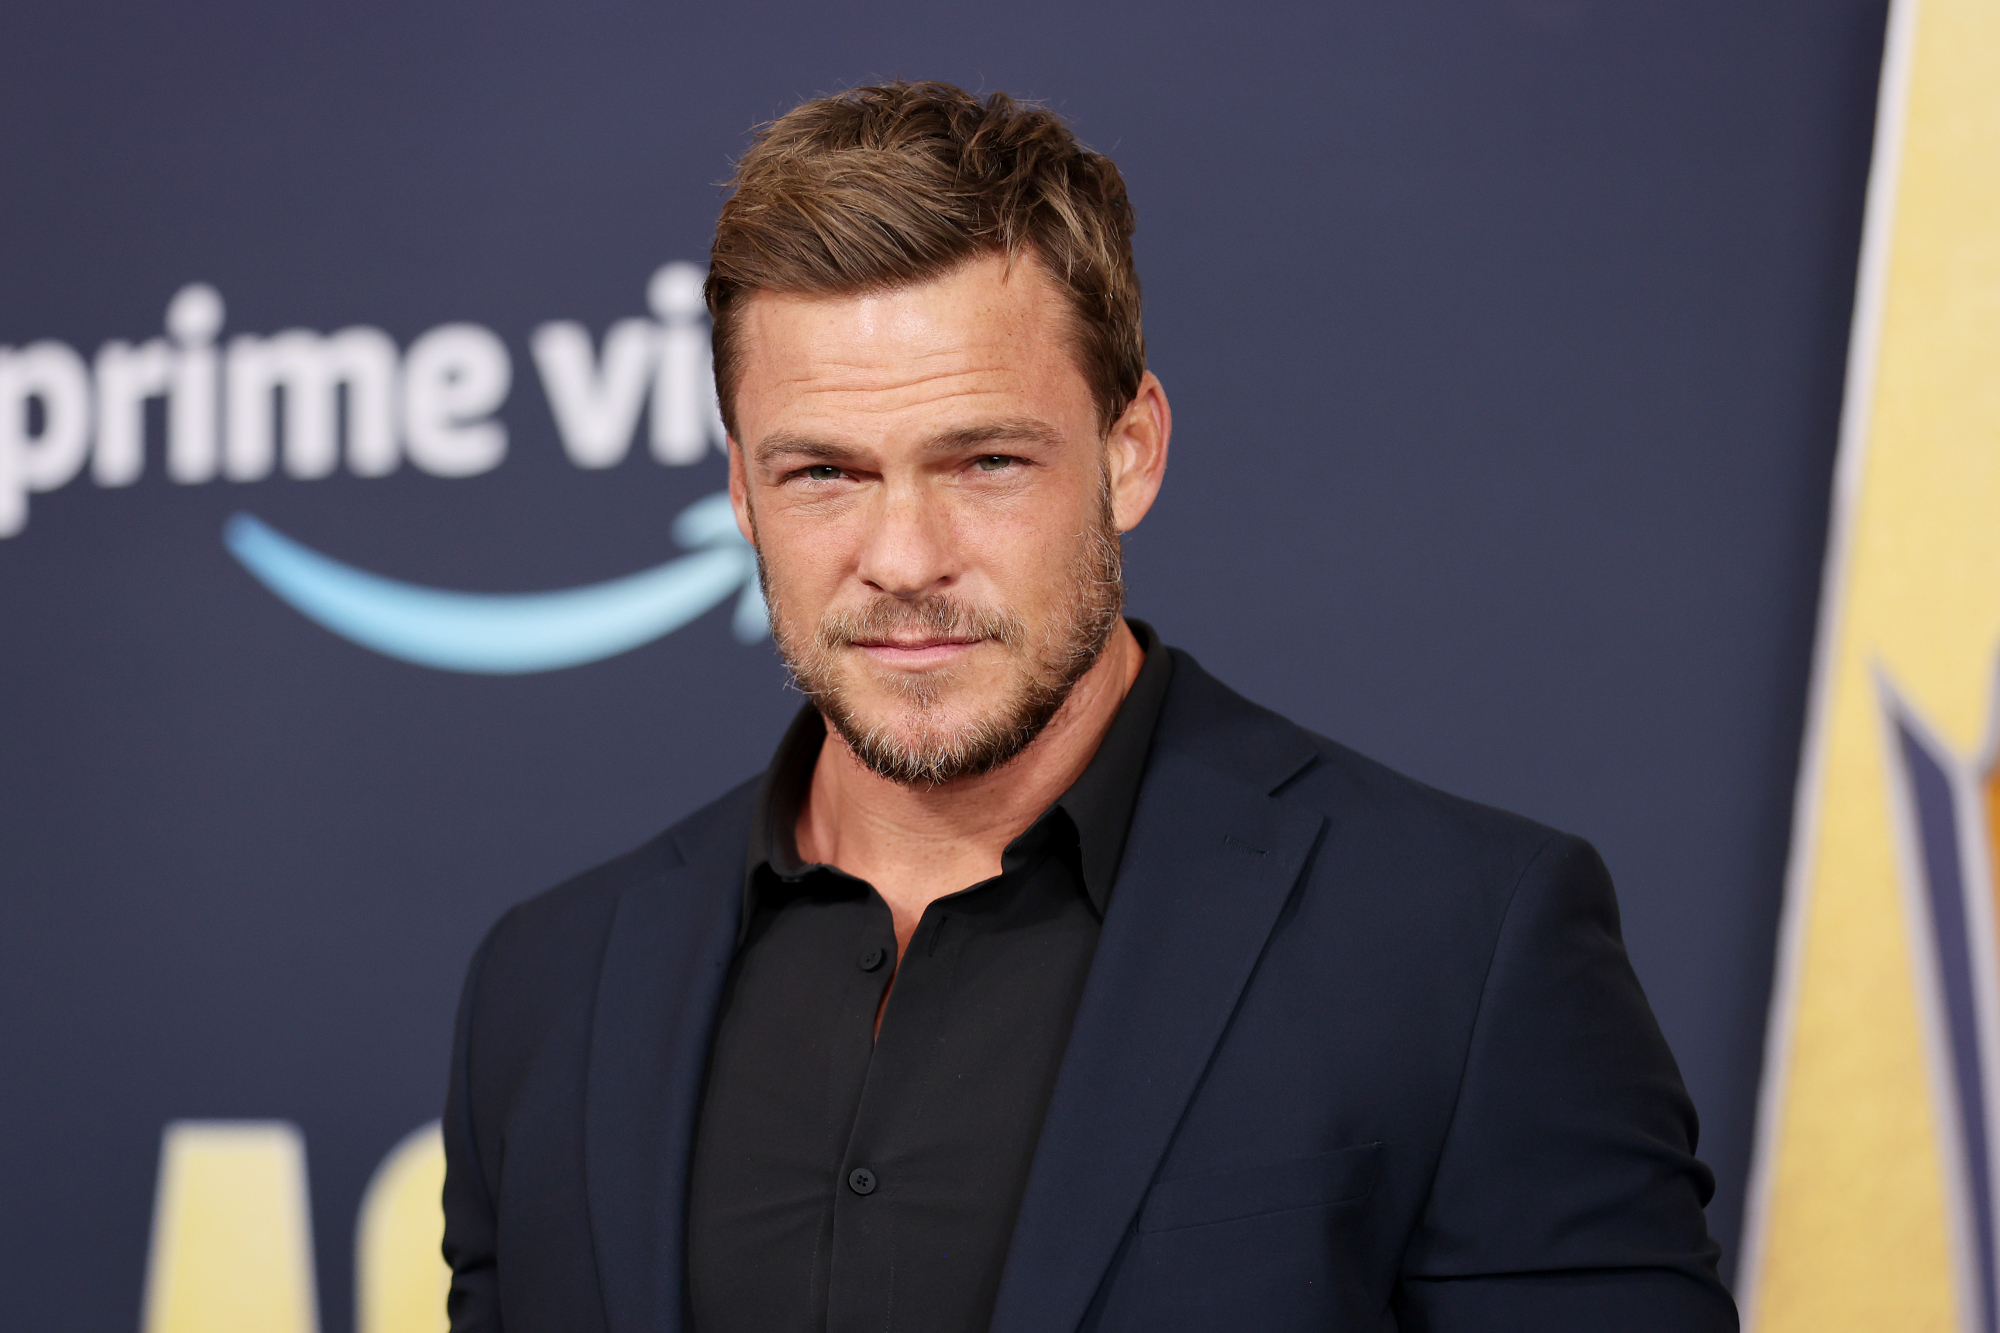 Alan Ritchson wearing a black suit in front of Prime Video step and repeat